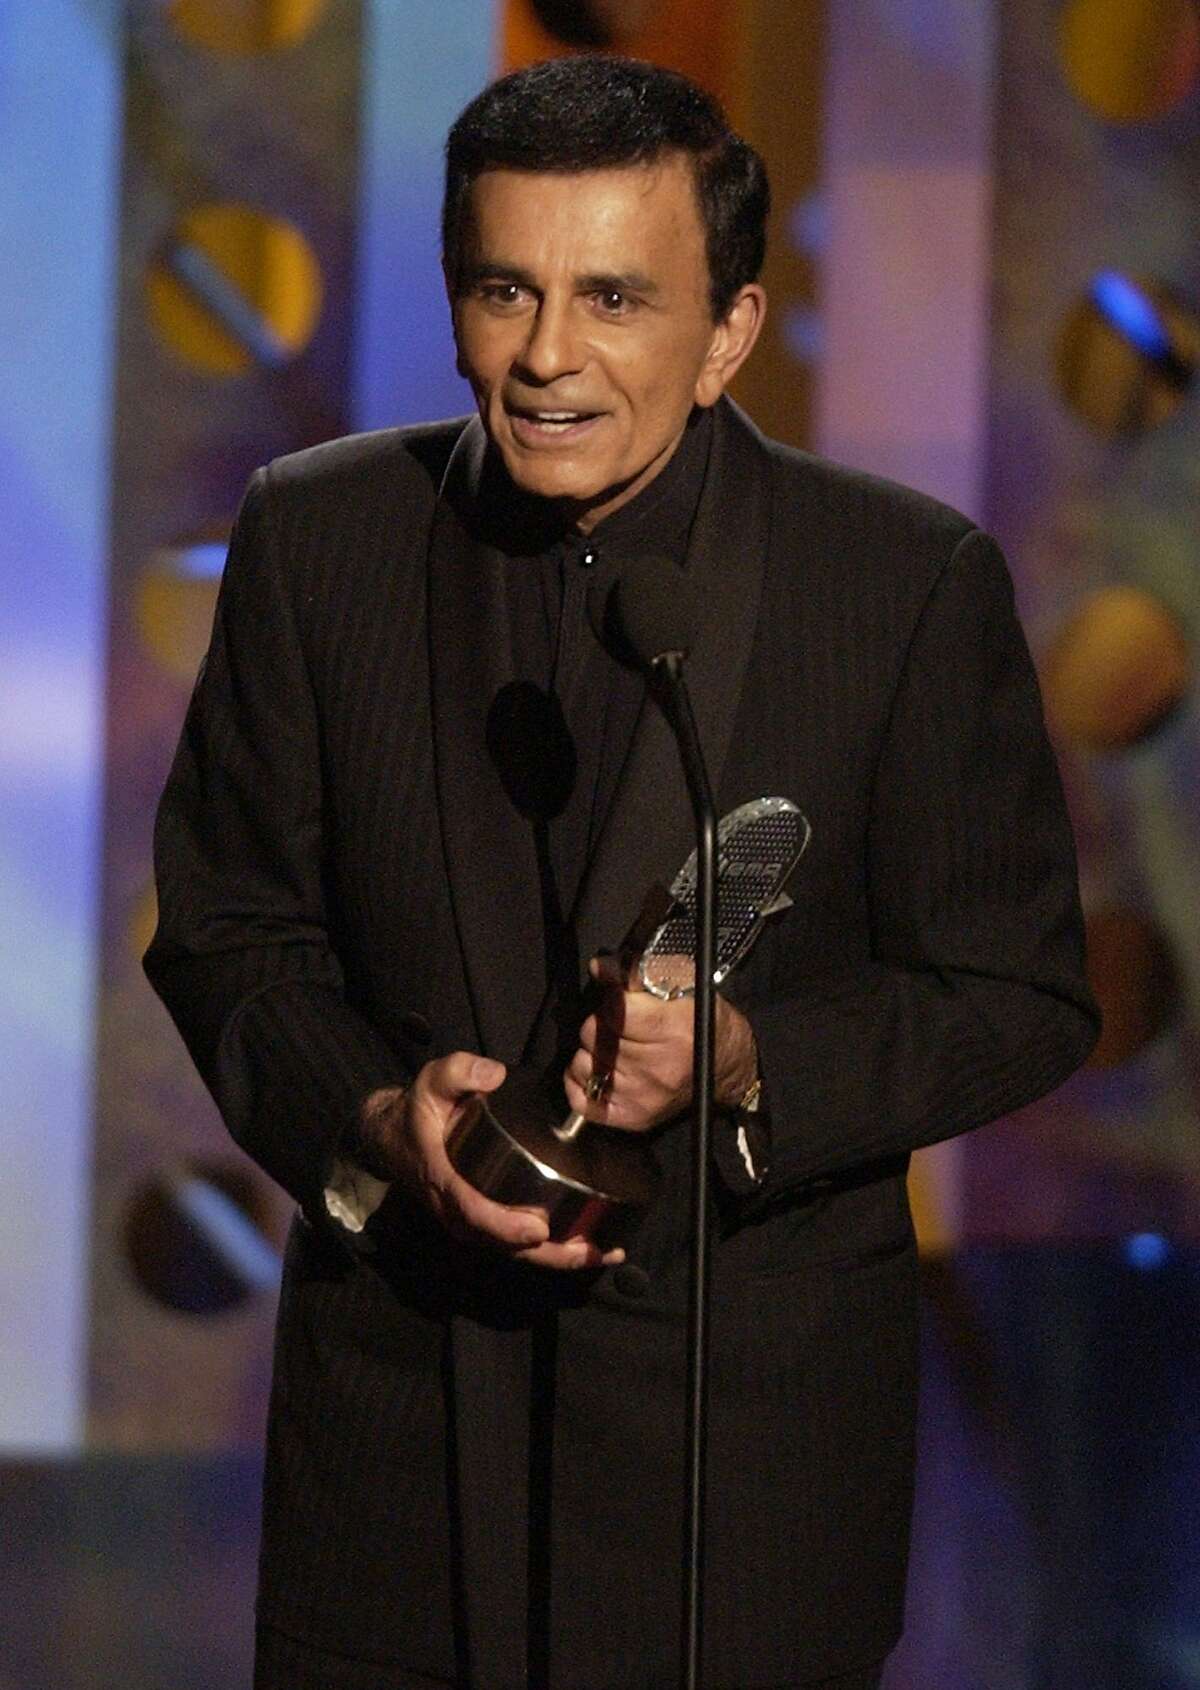 FILE - In this Monday, Oct. 27, 2003 file photo, Casey Kasem accepts a radio icon award during the Radio Music Awards in Las Vegas. Kasem, the smooth-voiced radio broadcaster who became the king of the top 40 countdown, died Sunday, June 15, 2014, according to Danny Deraney, publicist for Kasem's daughter, Kerri. He was 82. (AP Photo/Joe Cavaretta, file)